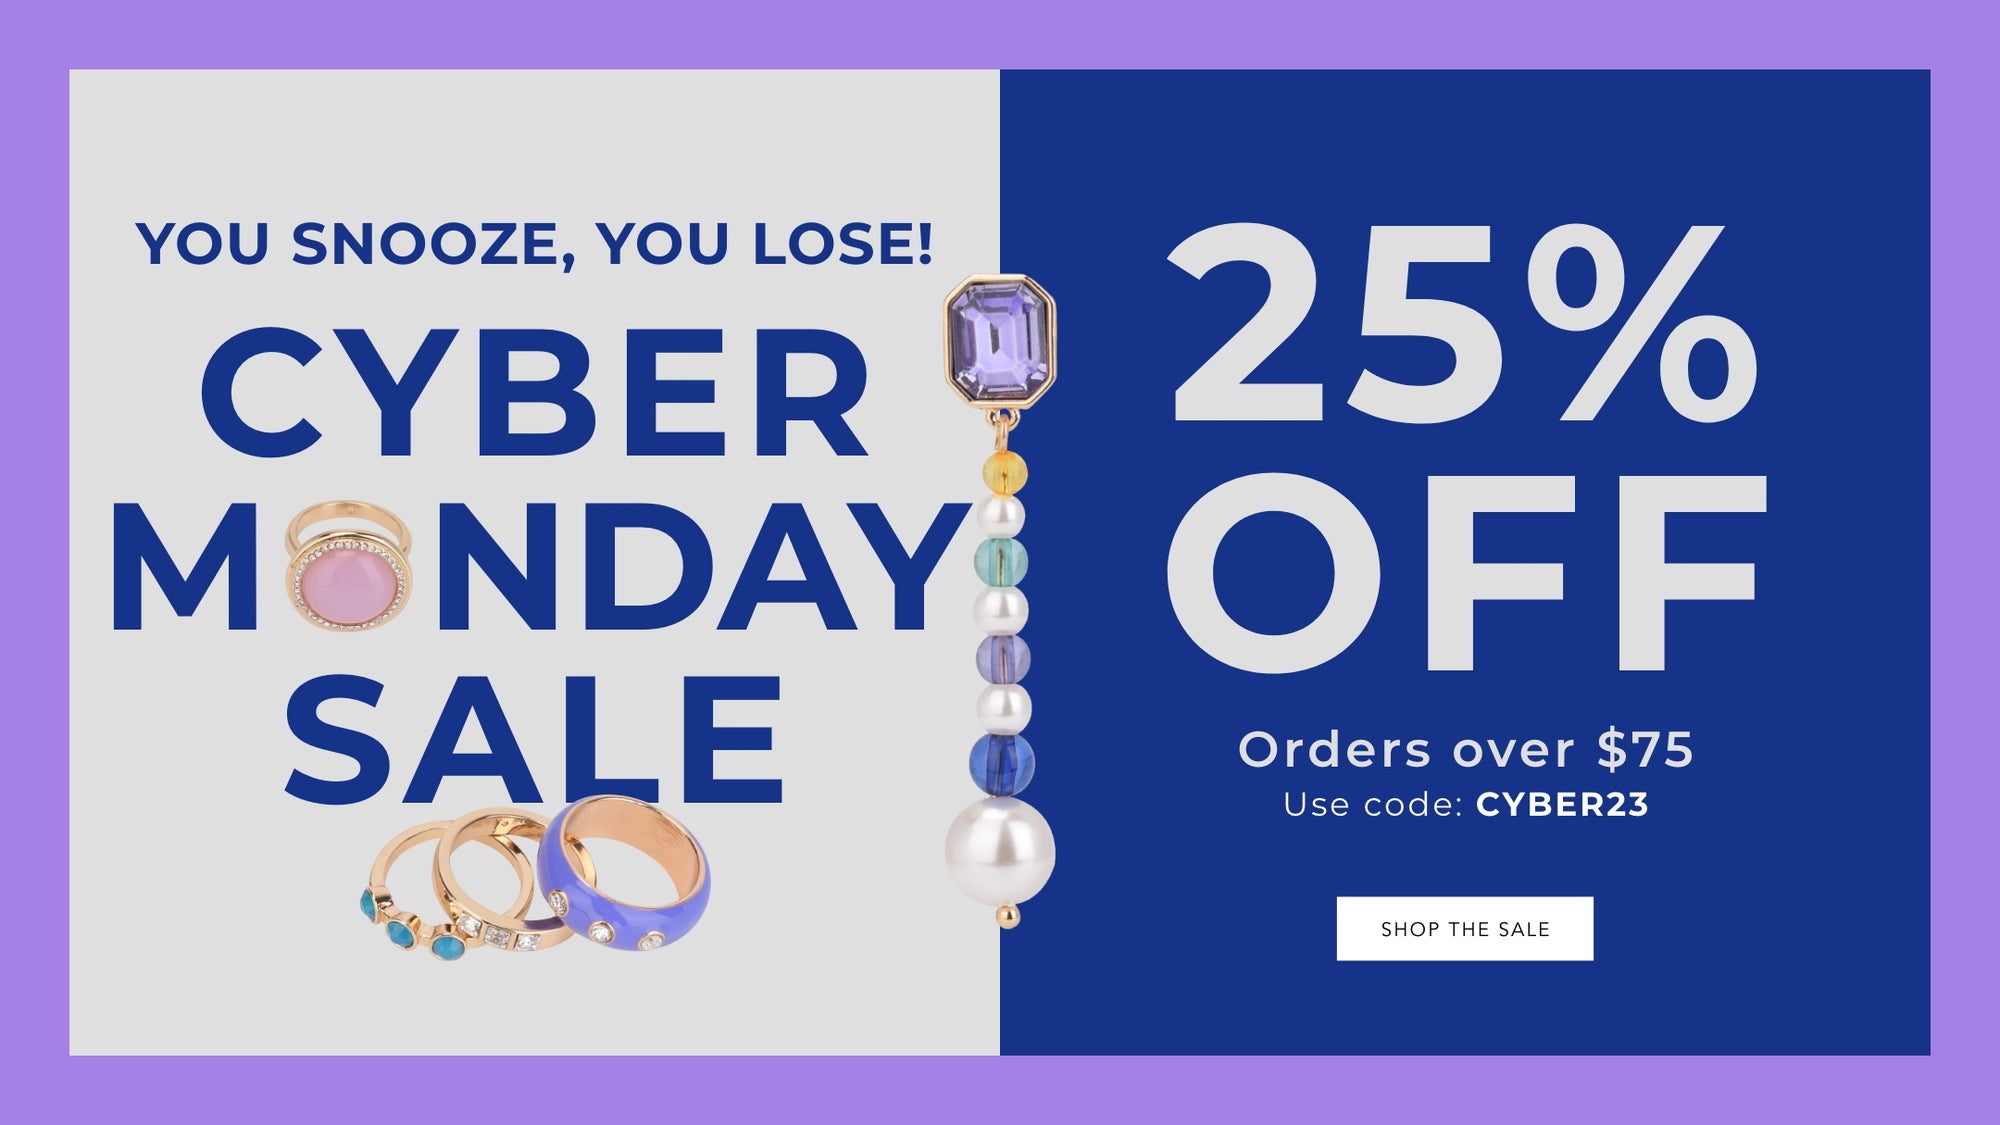 cyber monday sale 25% off $75+ sitewide use code: cyber23 